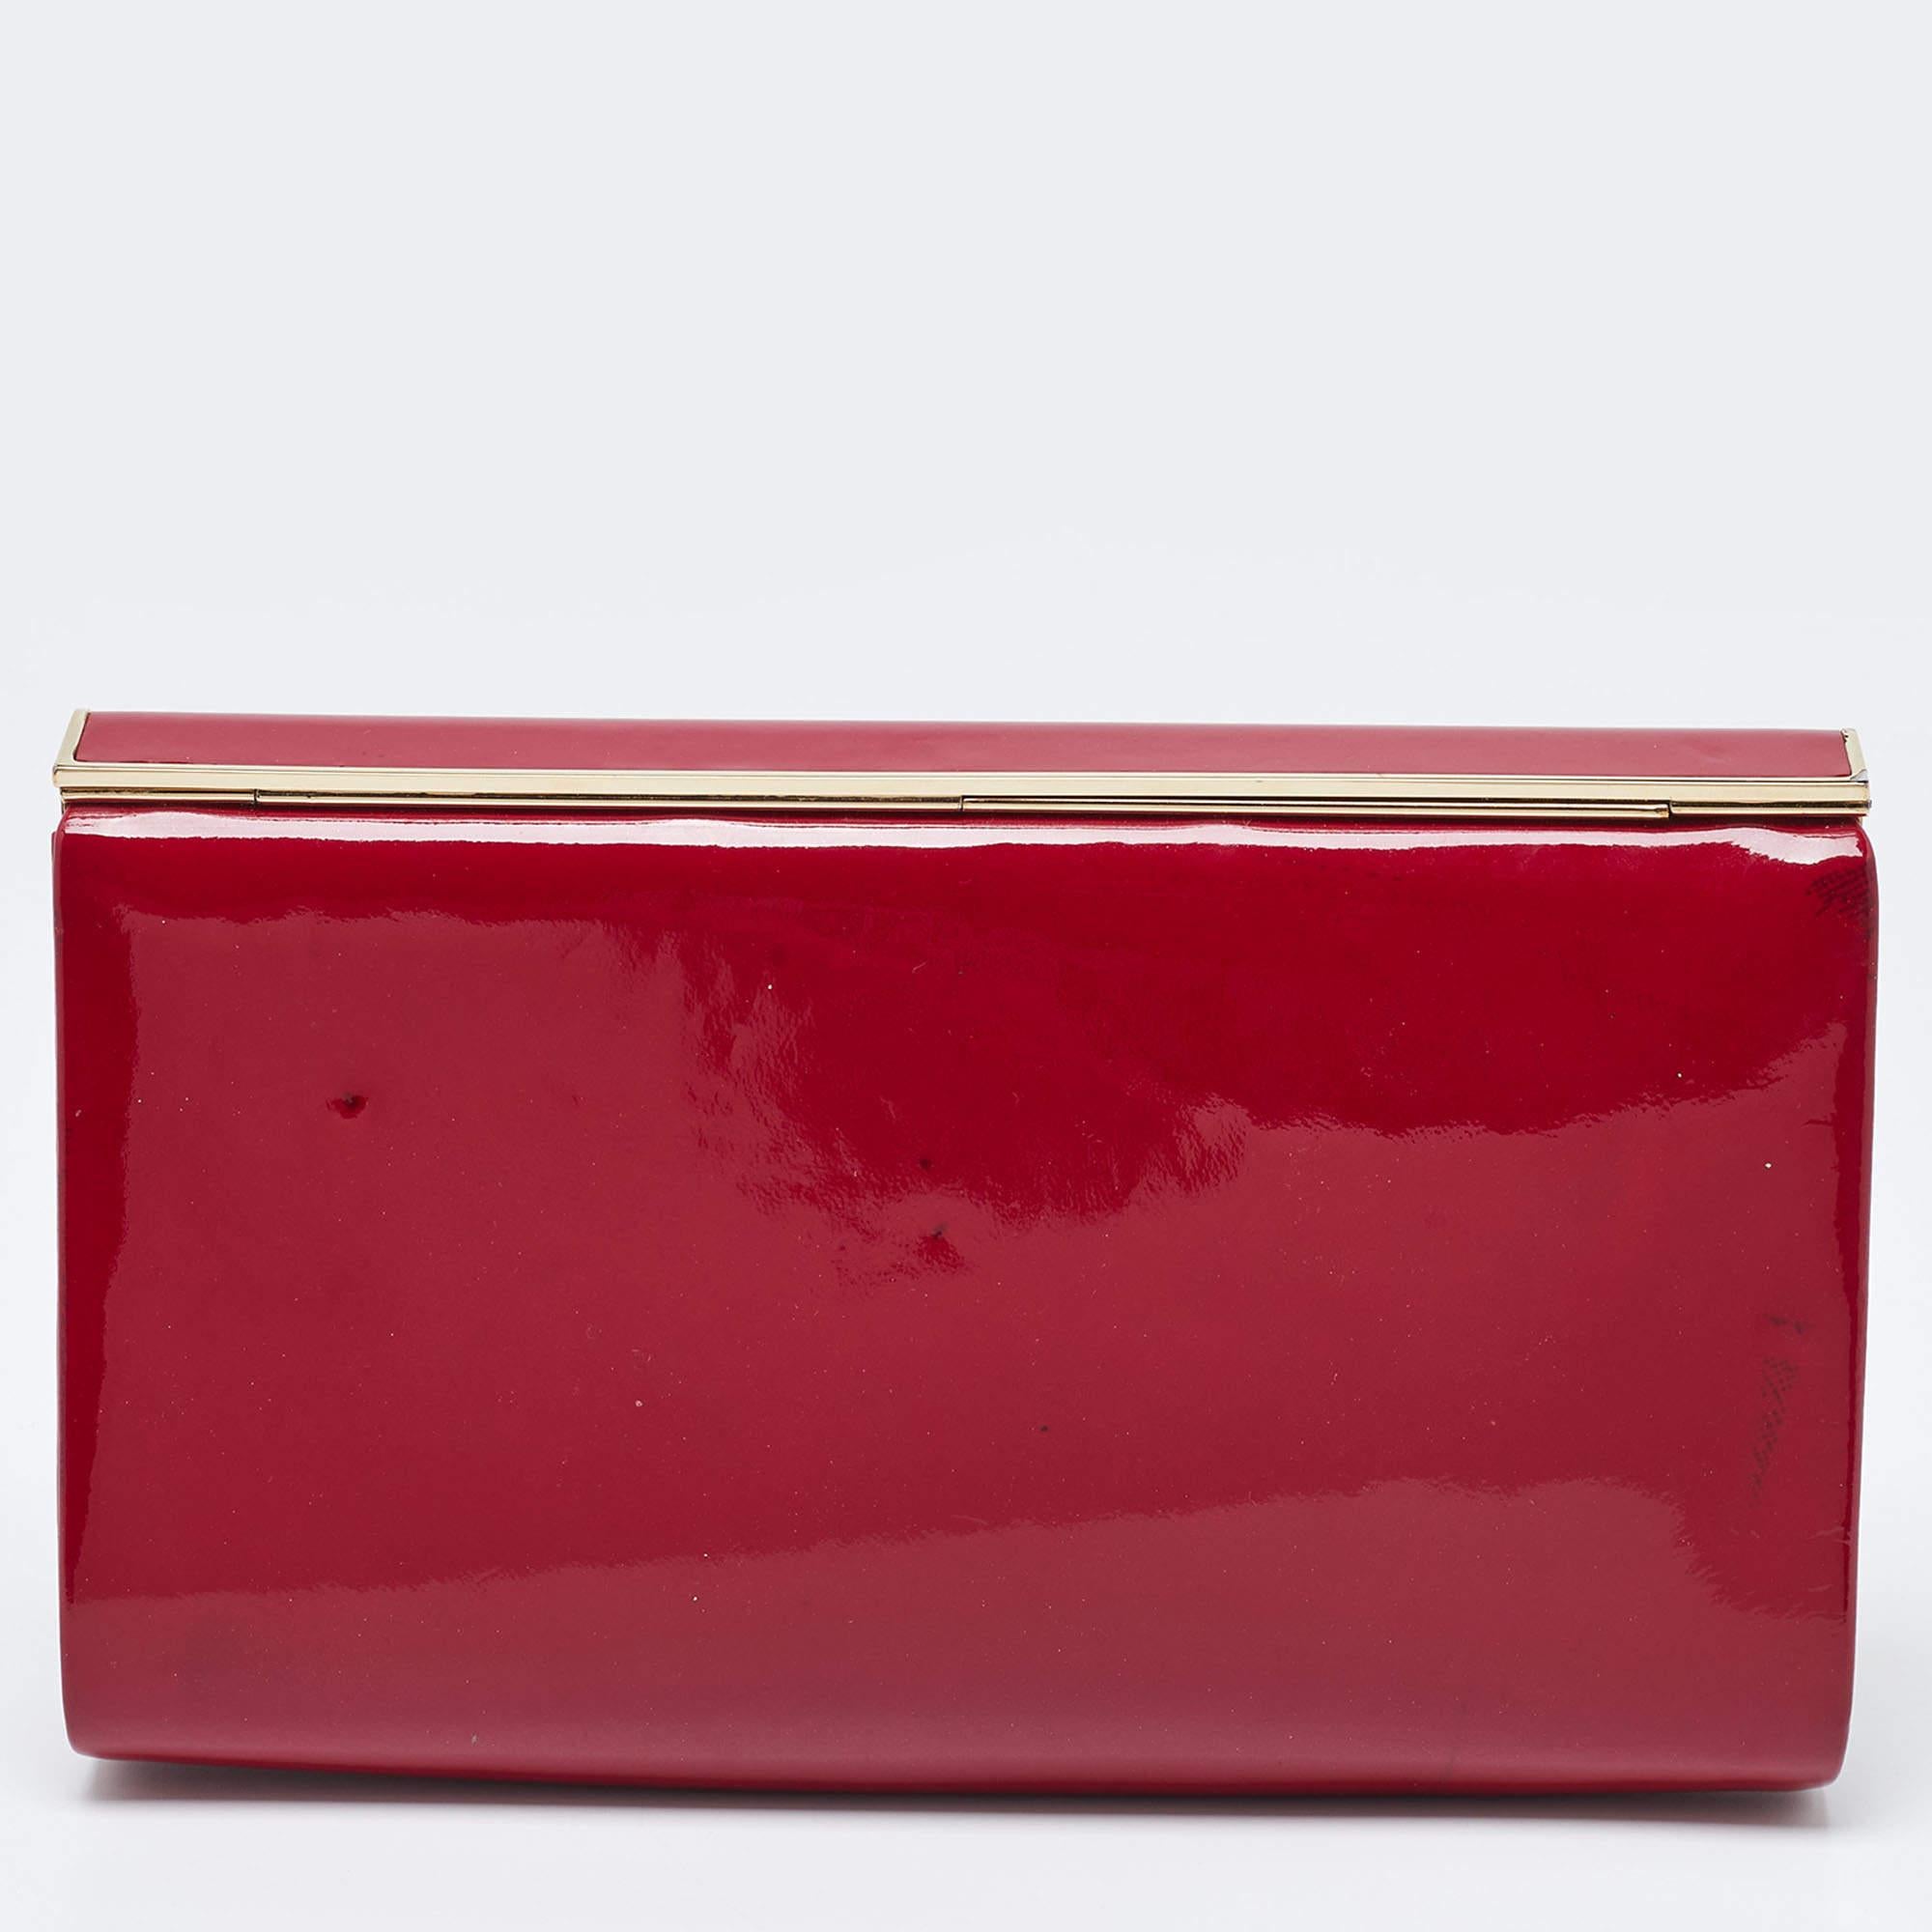 Complete an elite look with this Jimmy Choo frame clutch that is perfect for any party or formal event. It features a stunning red color on patent leather exterior with a gold-tone metal opening that leads to a well-sized satin interior. It makes